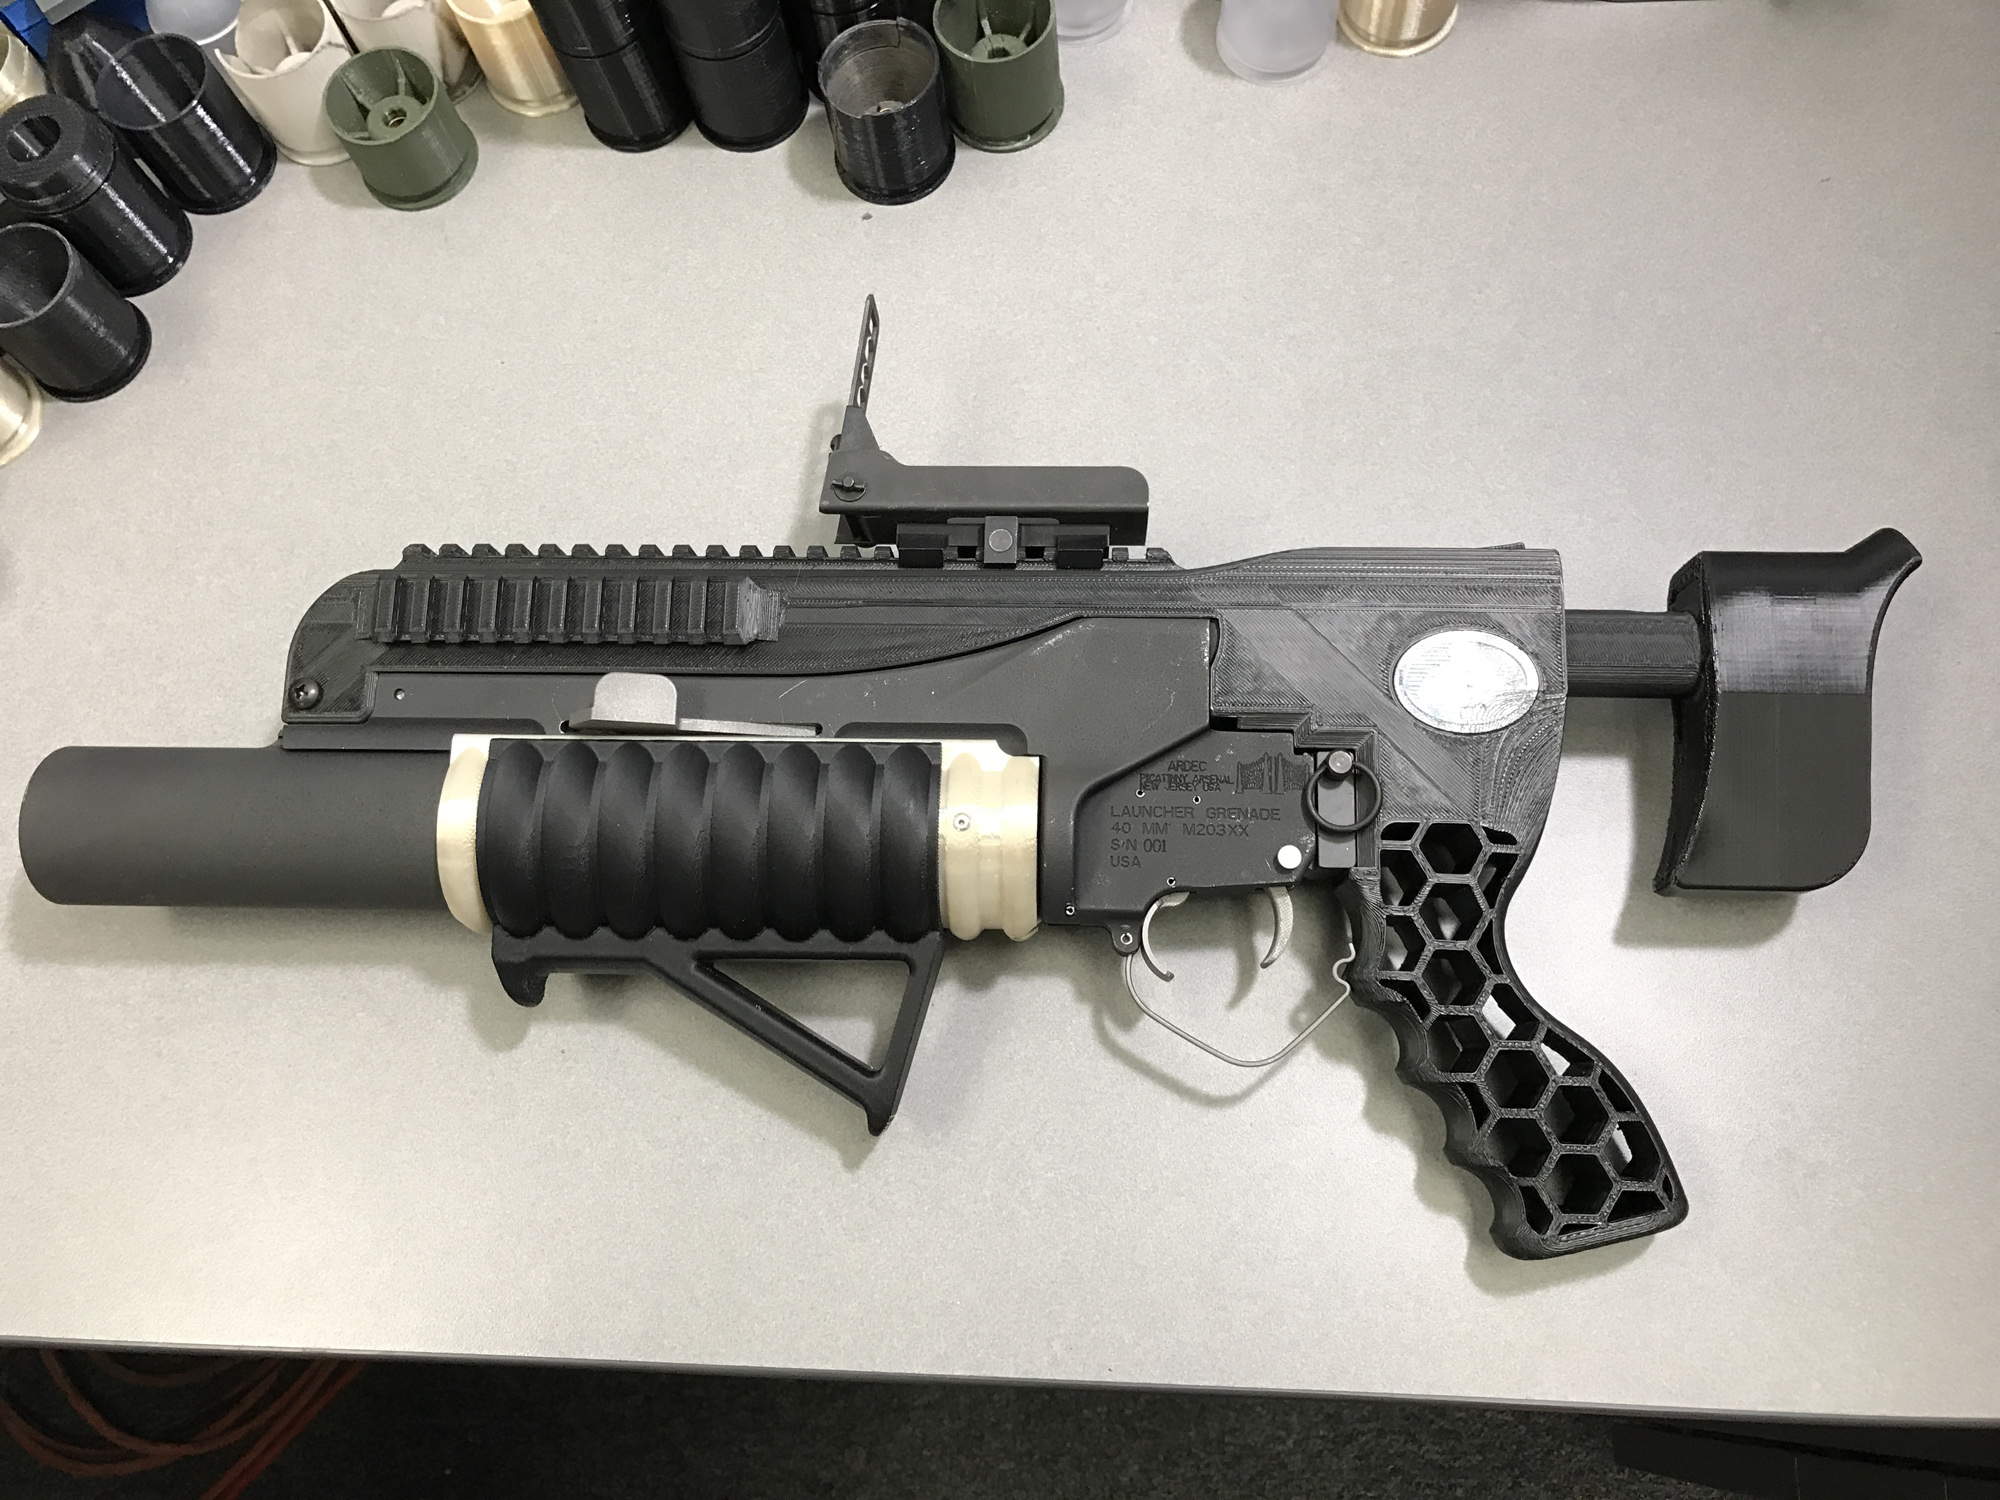 Image: Left-wing media LIES about 3D-printed guns, falsely claims they are “undetectable” deadly weapons